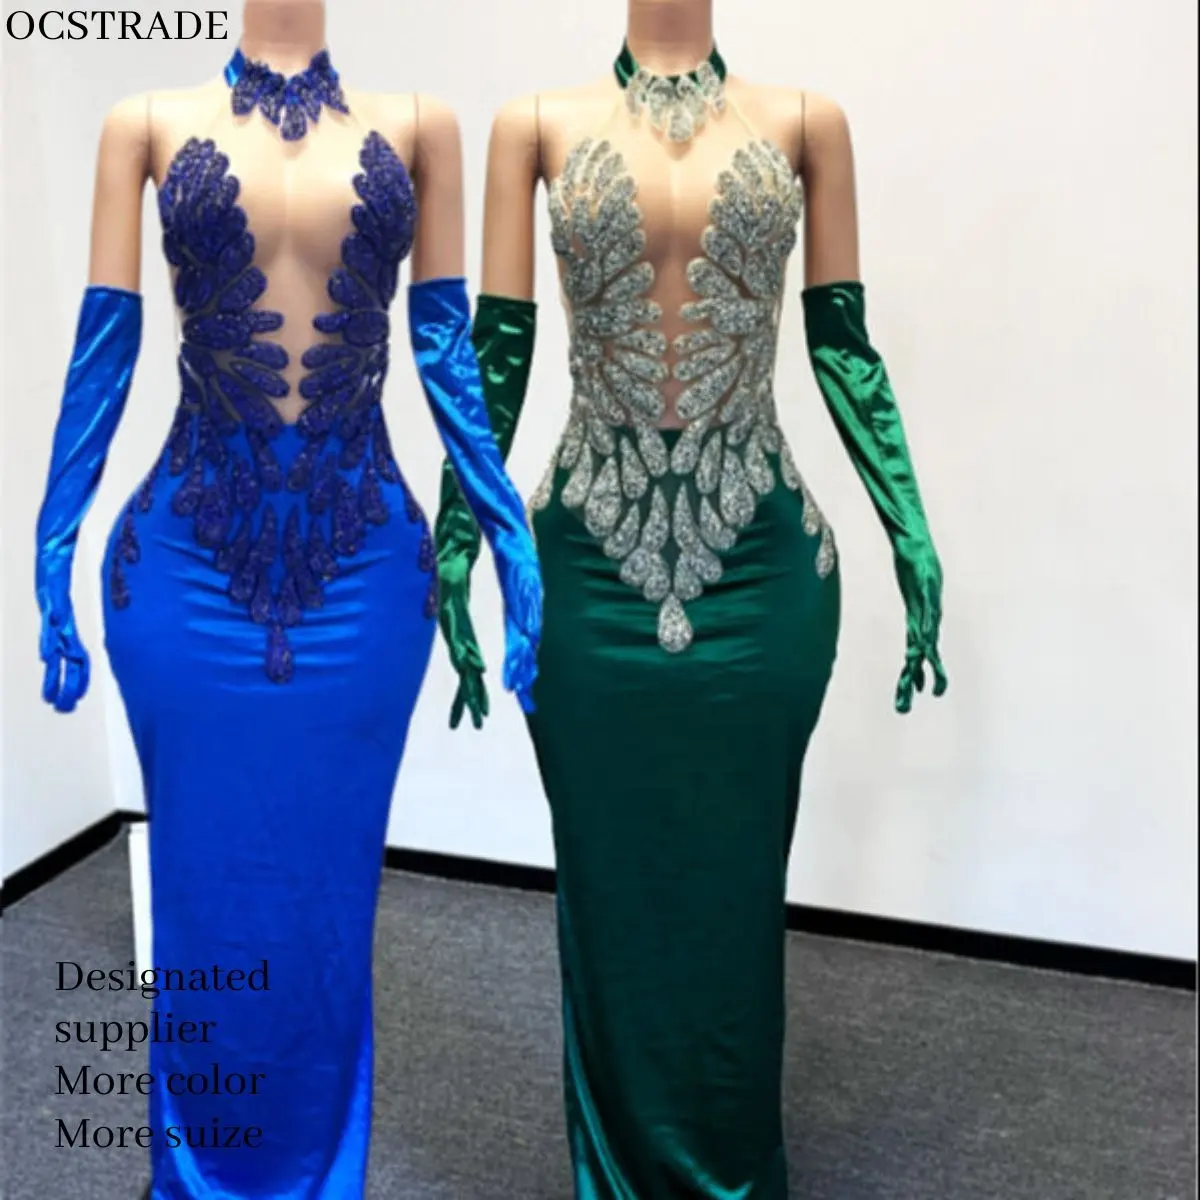 Ocstrade Evening Gowns For Women Dress Long Royal Blue Sexy Rhinestone Bodice Applique Dresses Luxury Green Prom Dresses